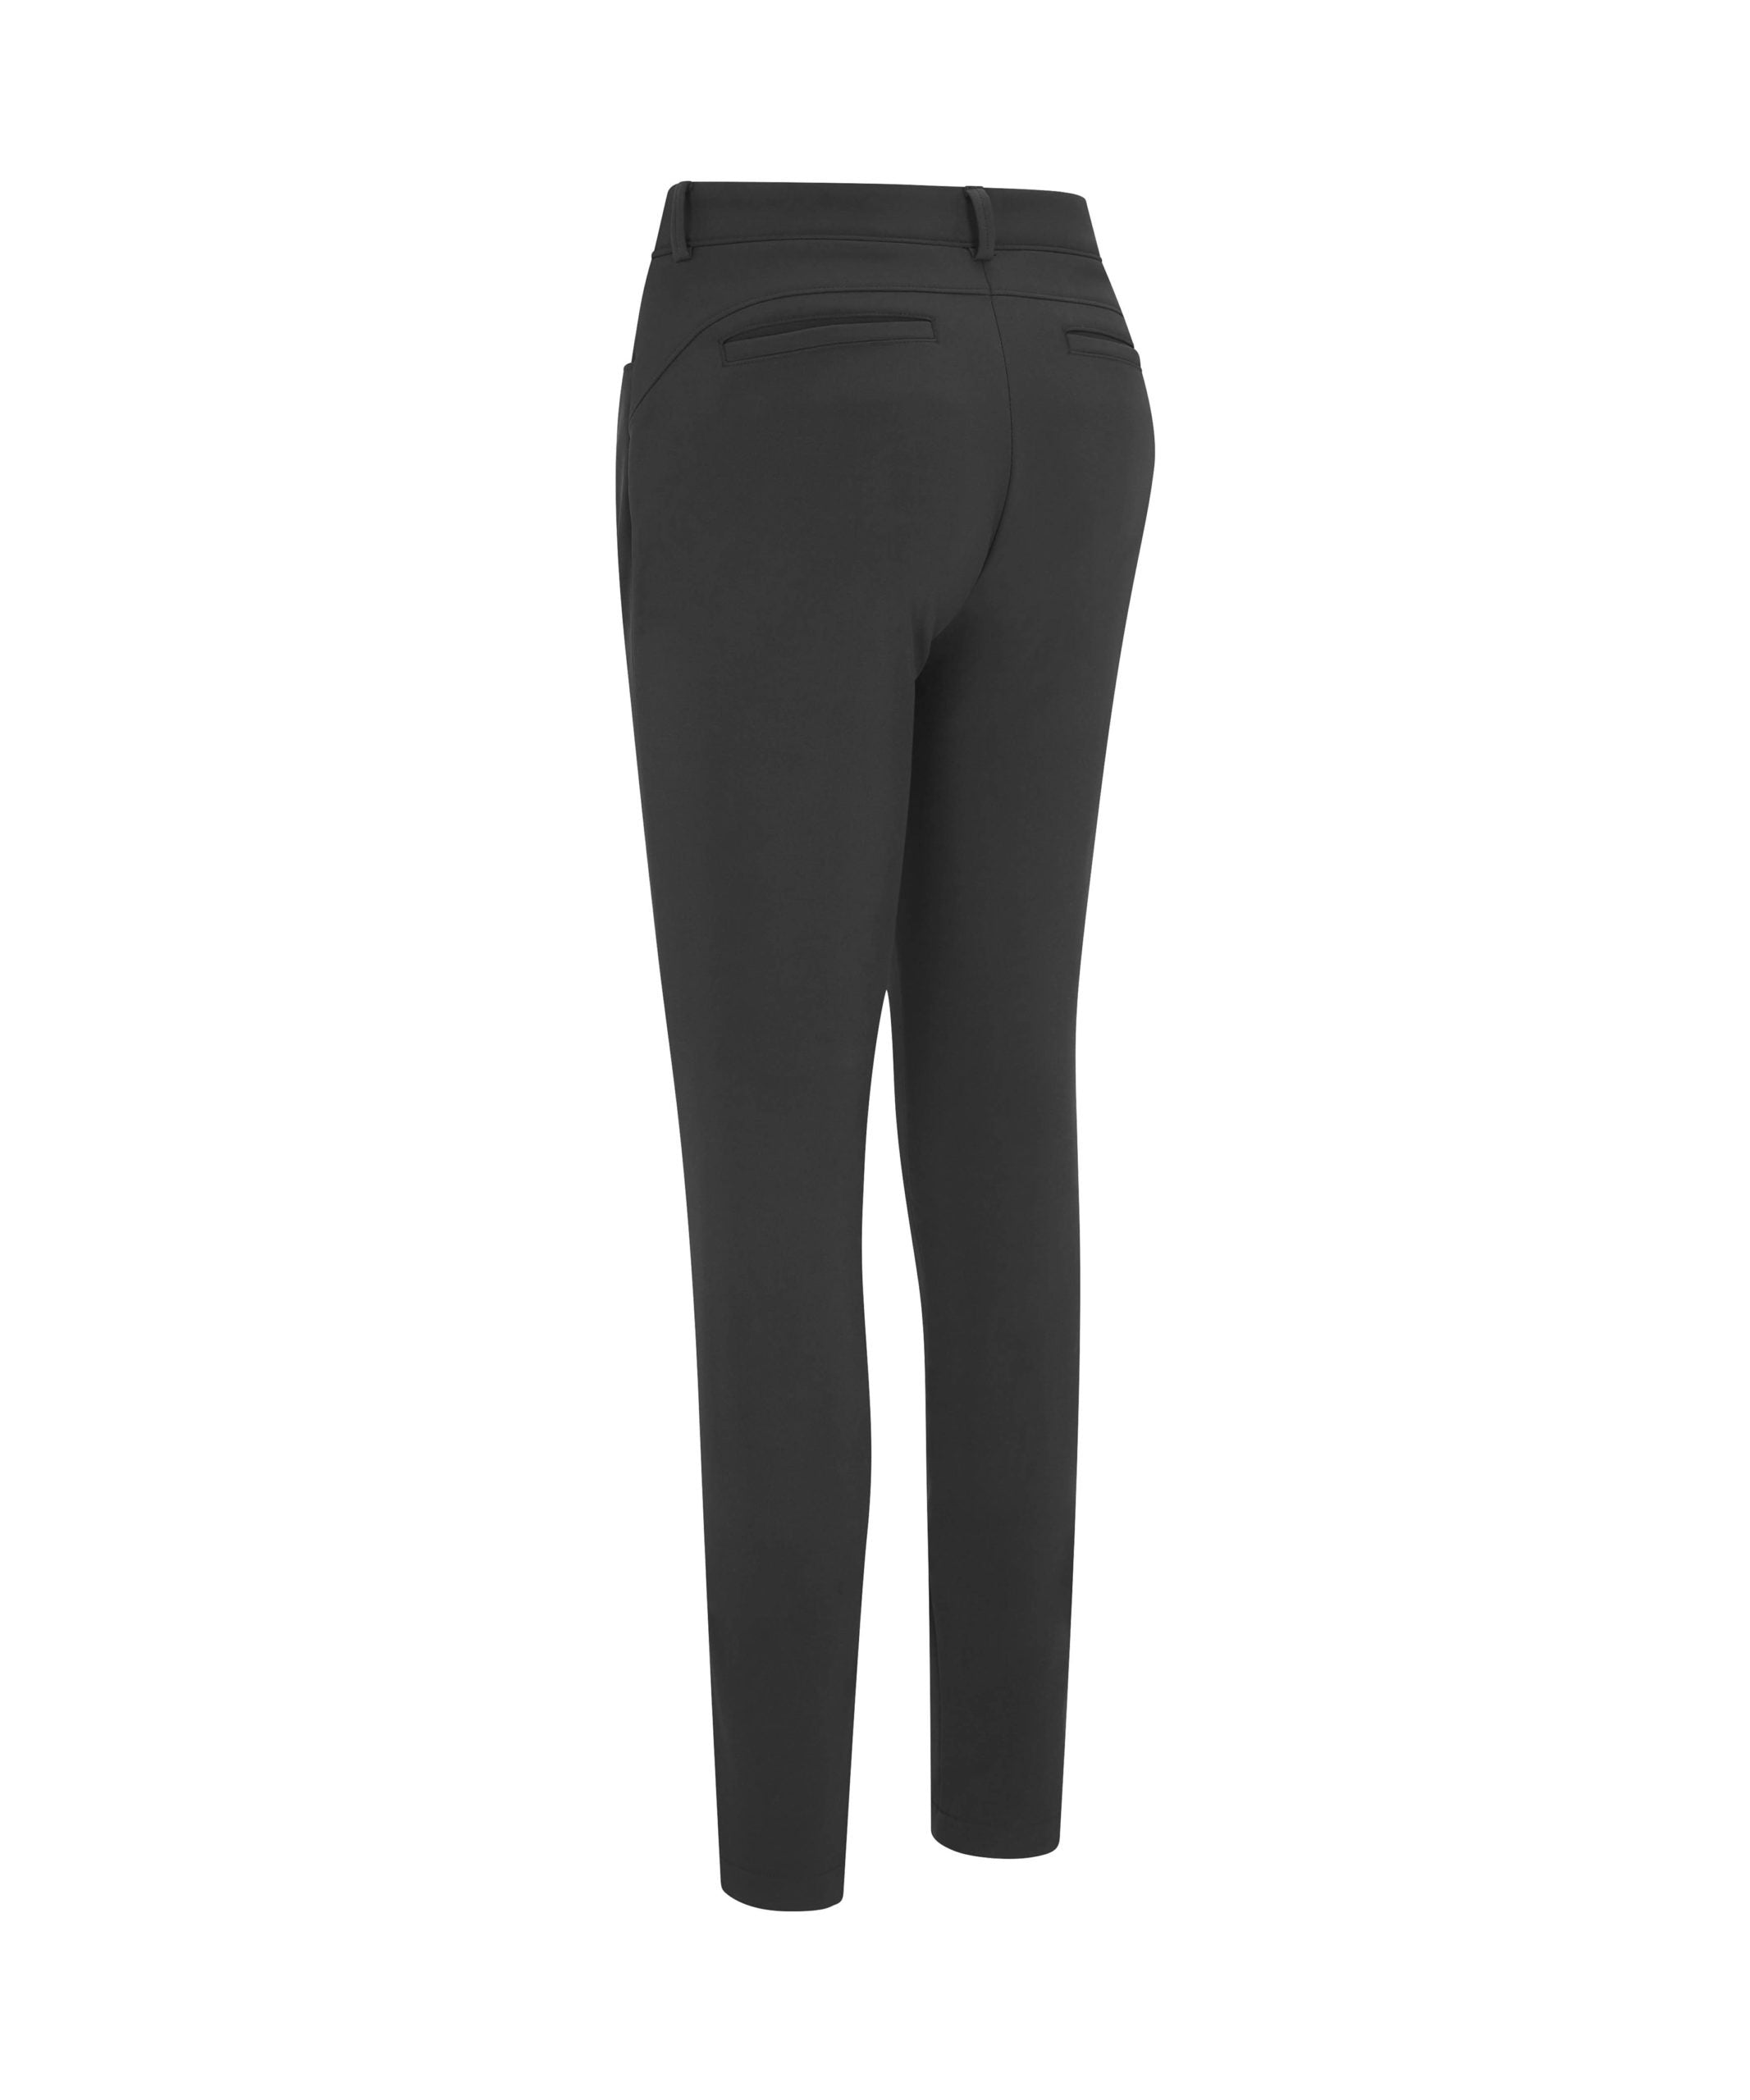 View Thermal Trousers In Caviar Caviar XS 27 information